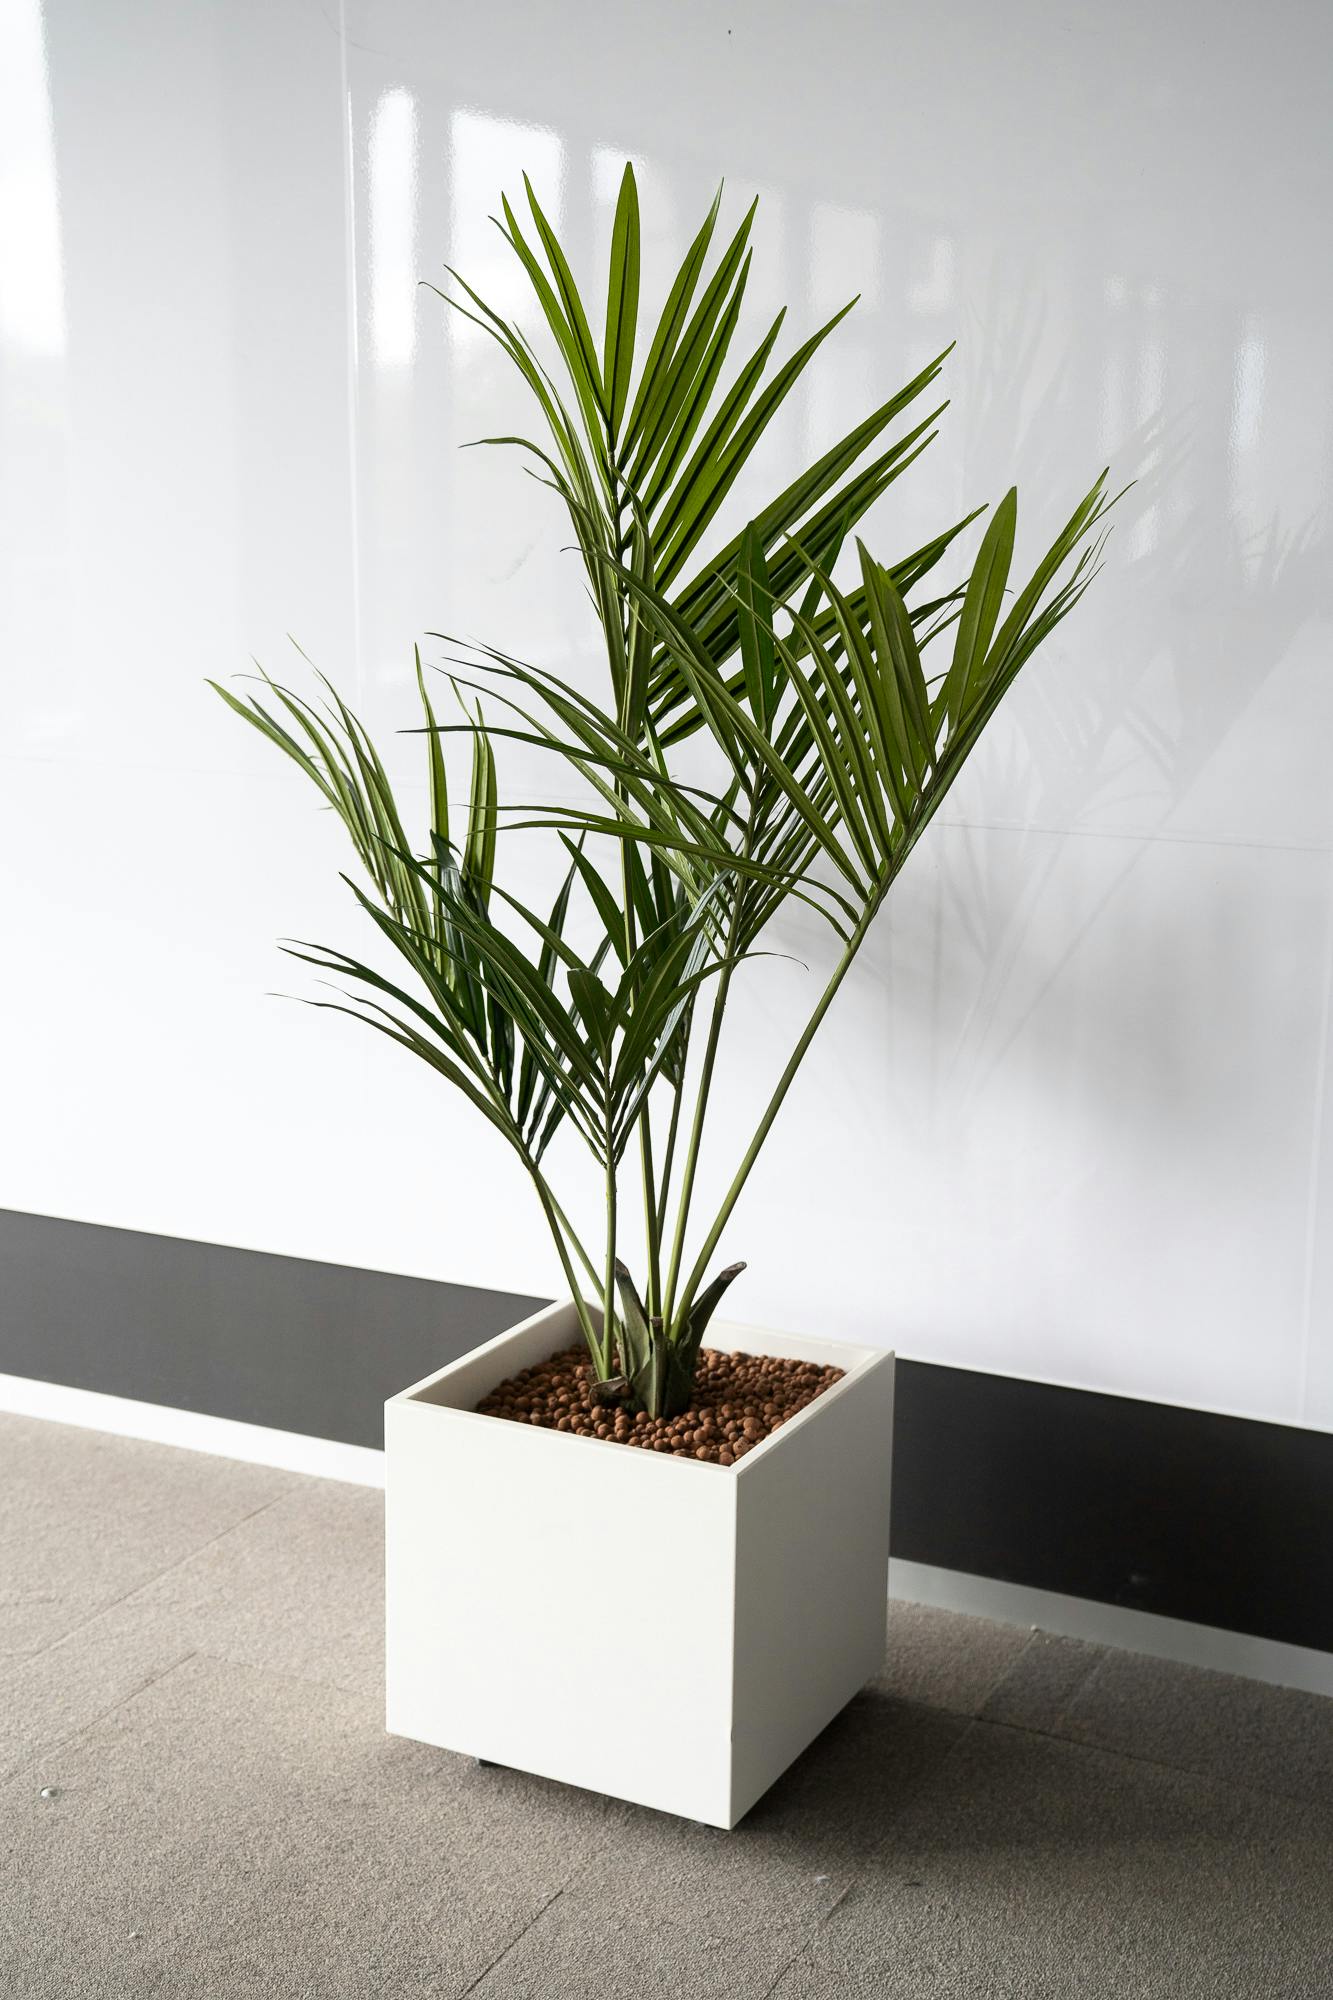 Square planter - Palm trees - Second hand quality "Miscellaneous" - Relieve Furniture